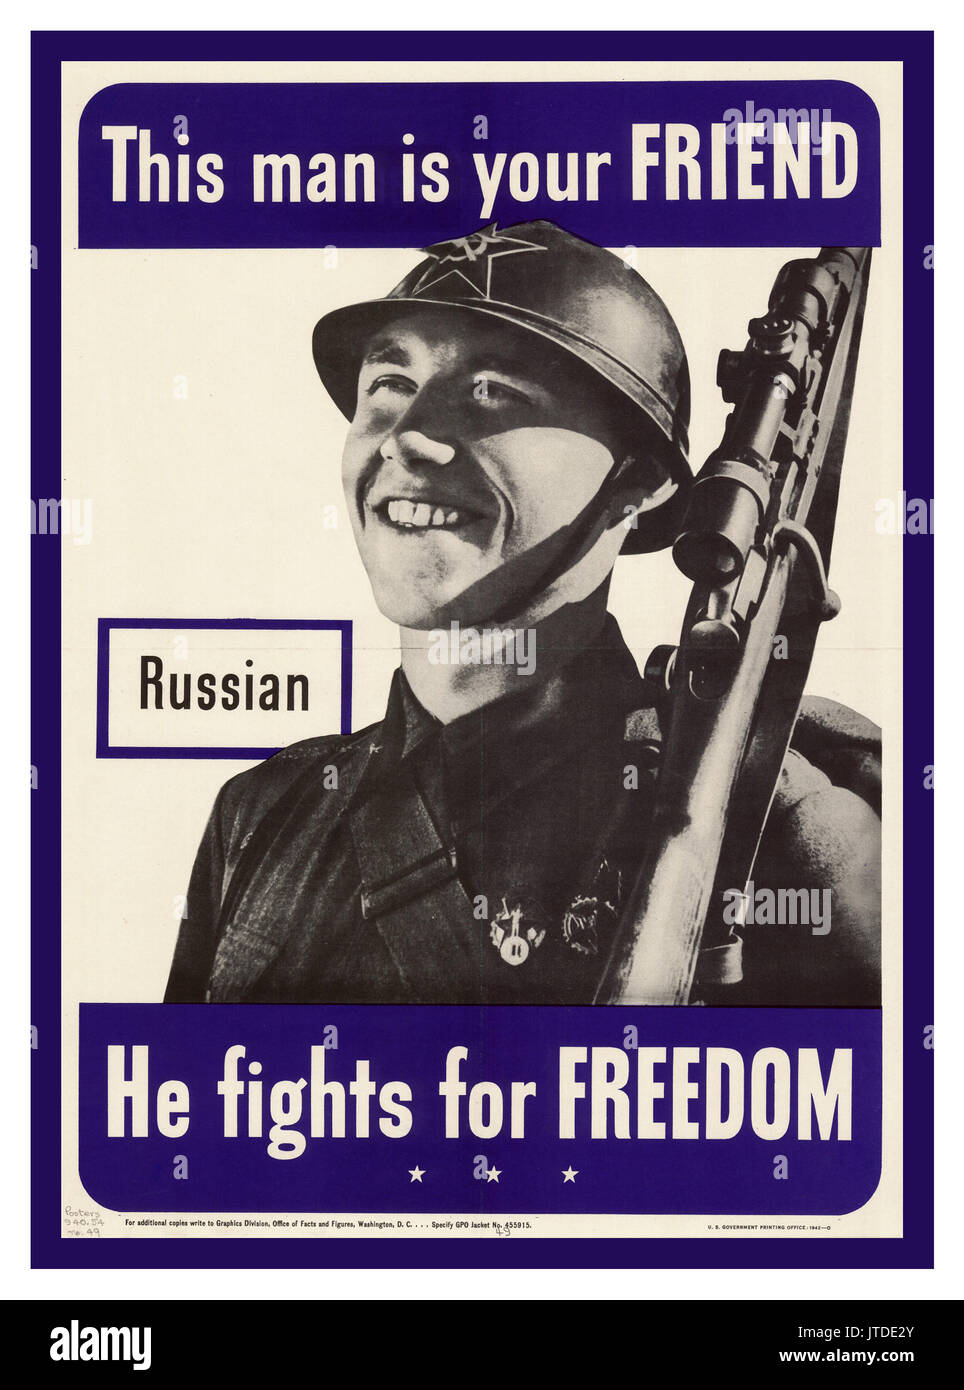 WW2 American Propaganda Poster showing a Russian Soldier as a friend fighting for freedom 1940's Stock Photo